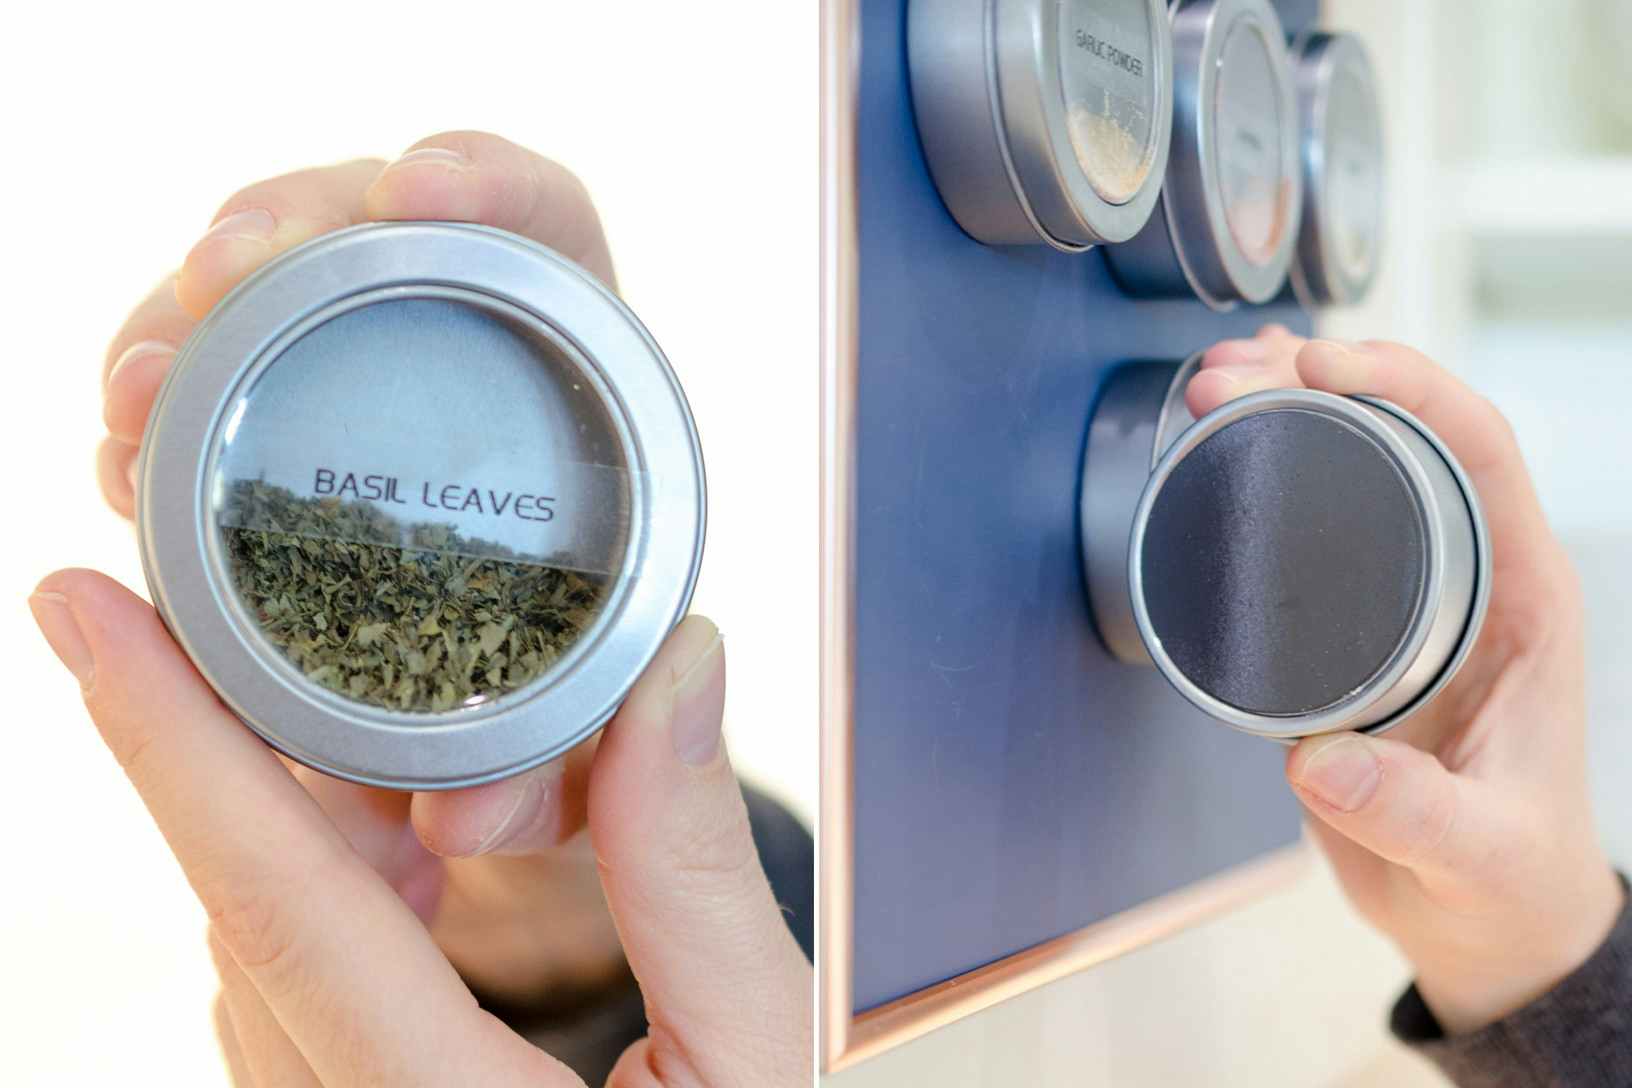 two images of a person storing spices in magnetic tins